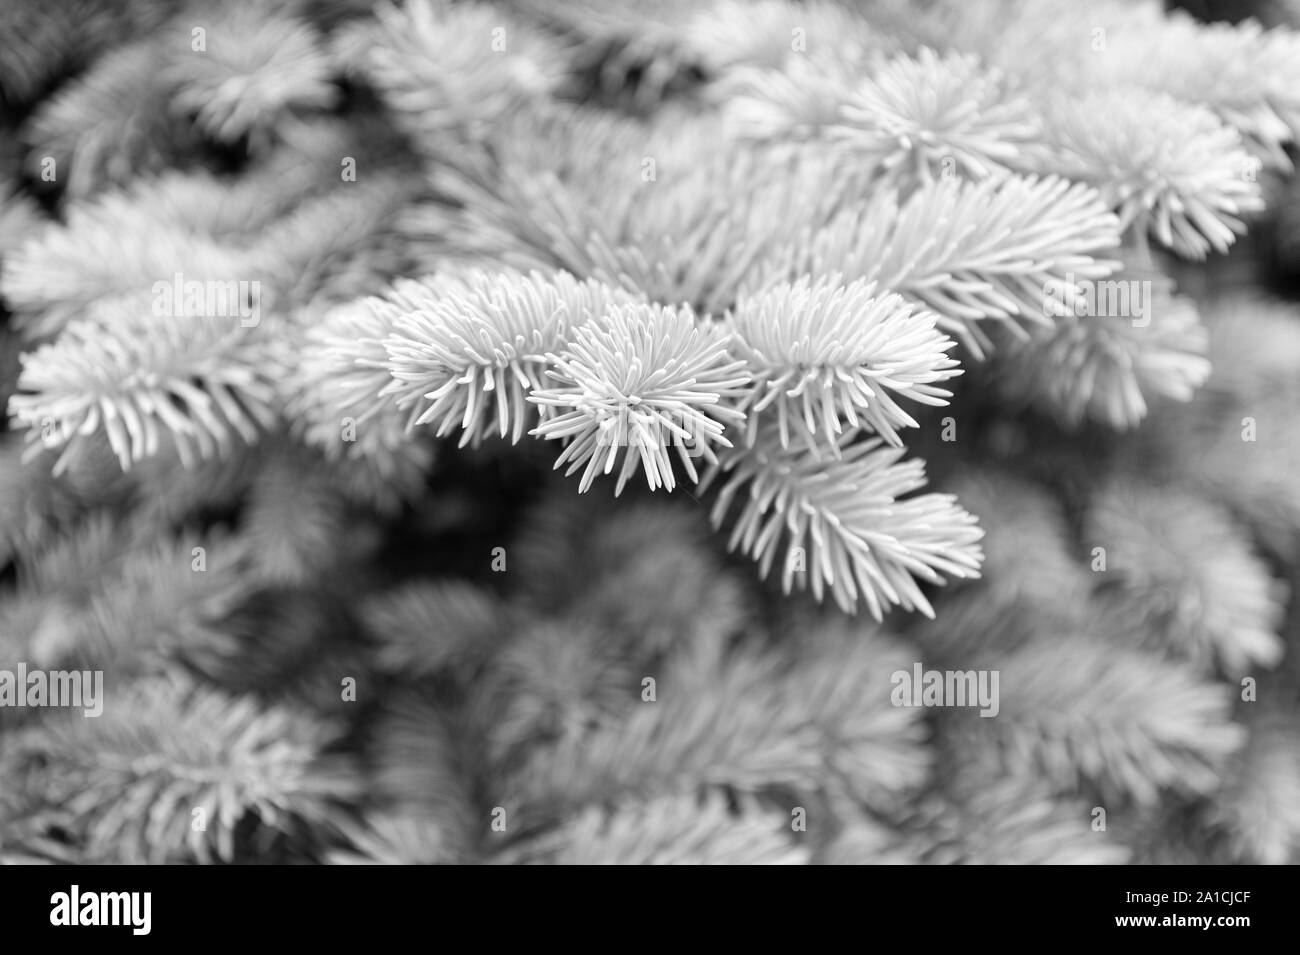 Symbolizing immortality and eternal life. Spruce or conifer plant. Spruce fir or needles on blurred natural background. Branches of pine spruce. Coniferous evergreen spruce tree. Stock Photo